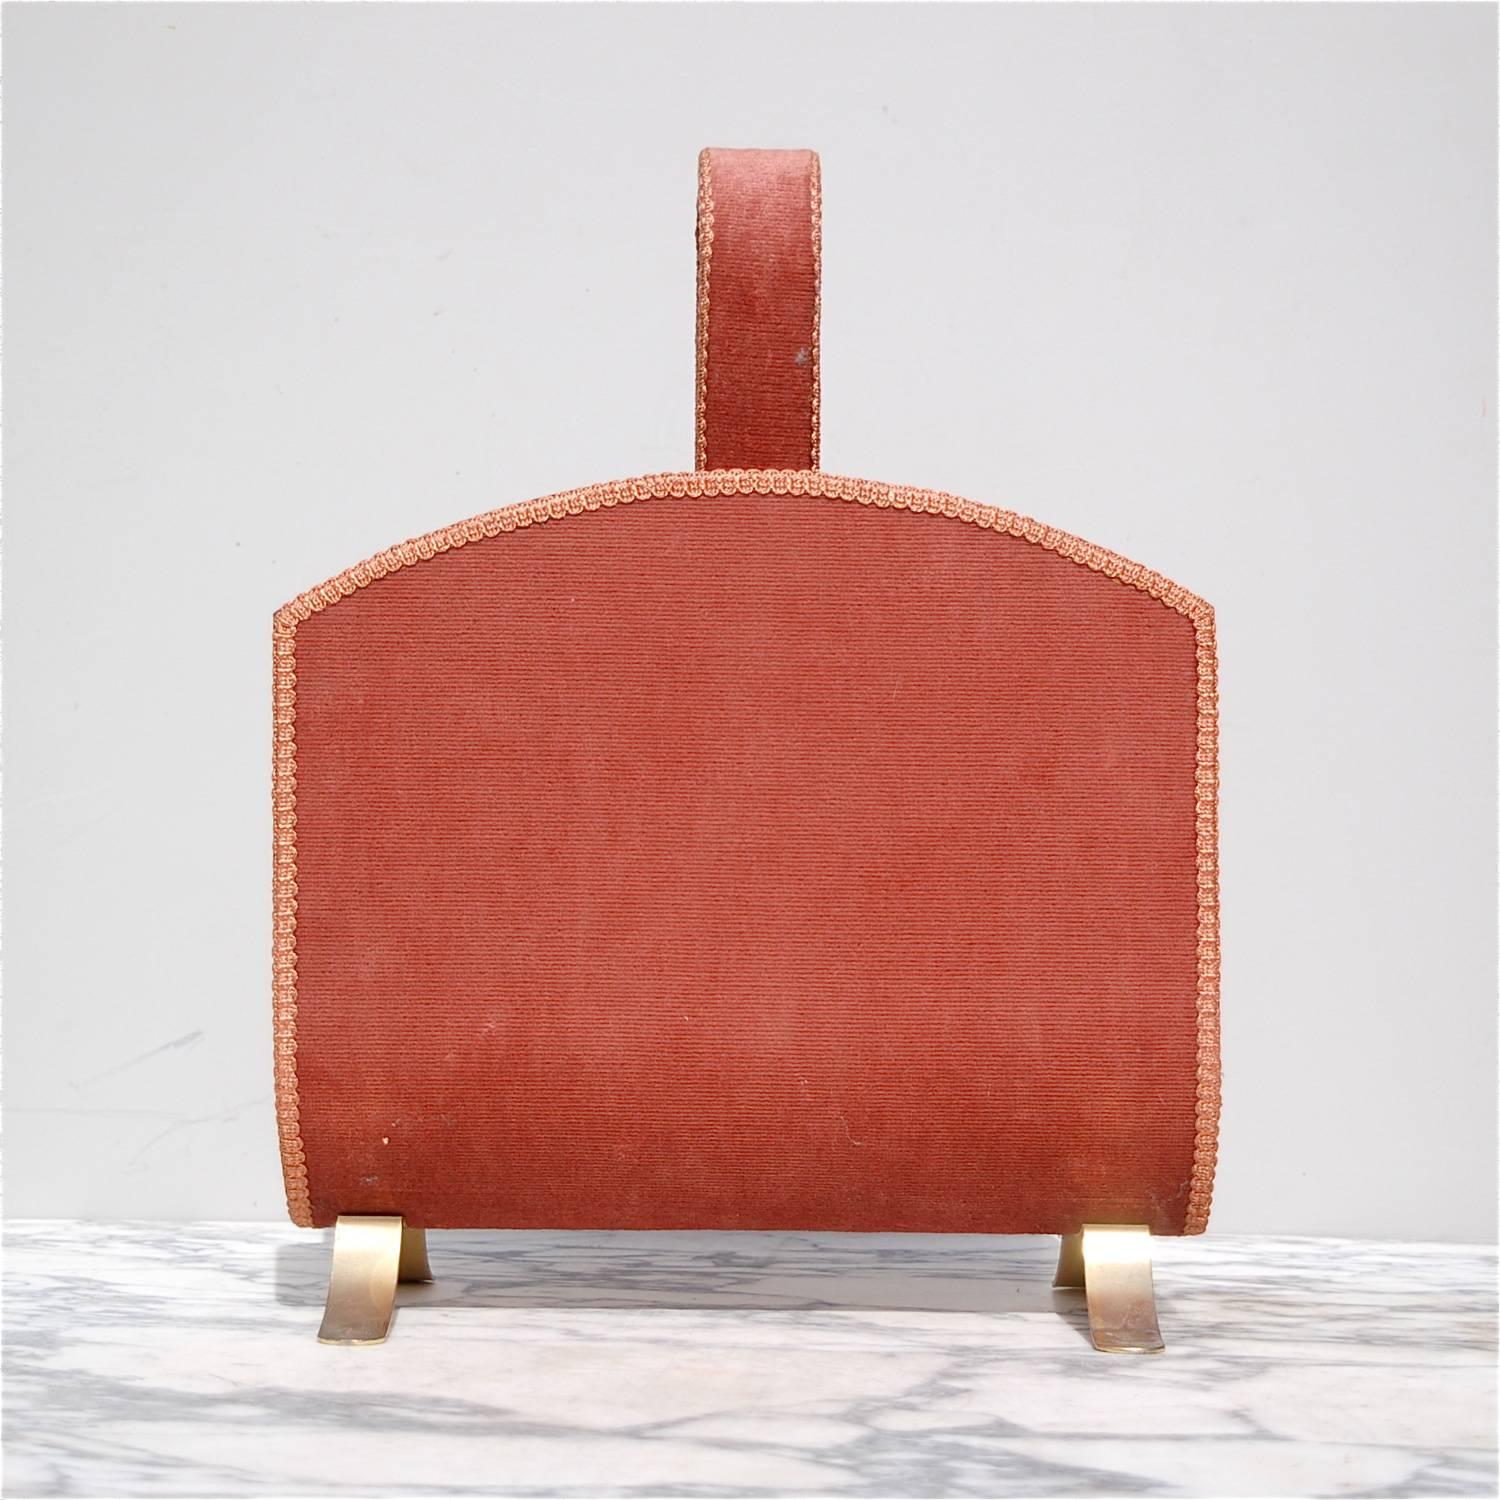 Mid-20th century magazine rack or newspaper holder in metal, which has been lacquered gold on the interior whilst the exterior is covered in its original dusty pink or vieux rose corduroy fabric with ribbon edging. Depending on which direction you